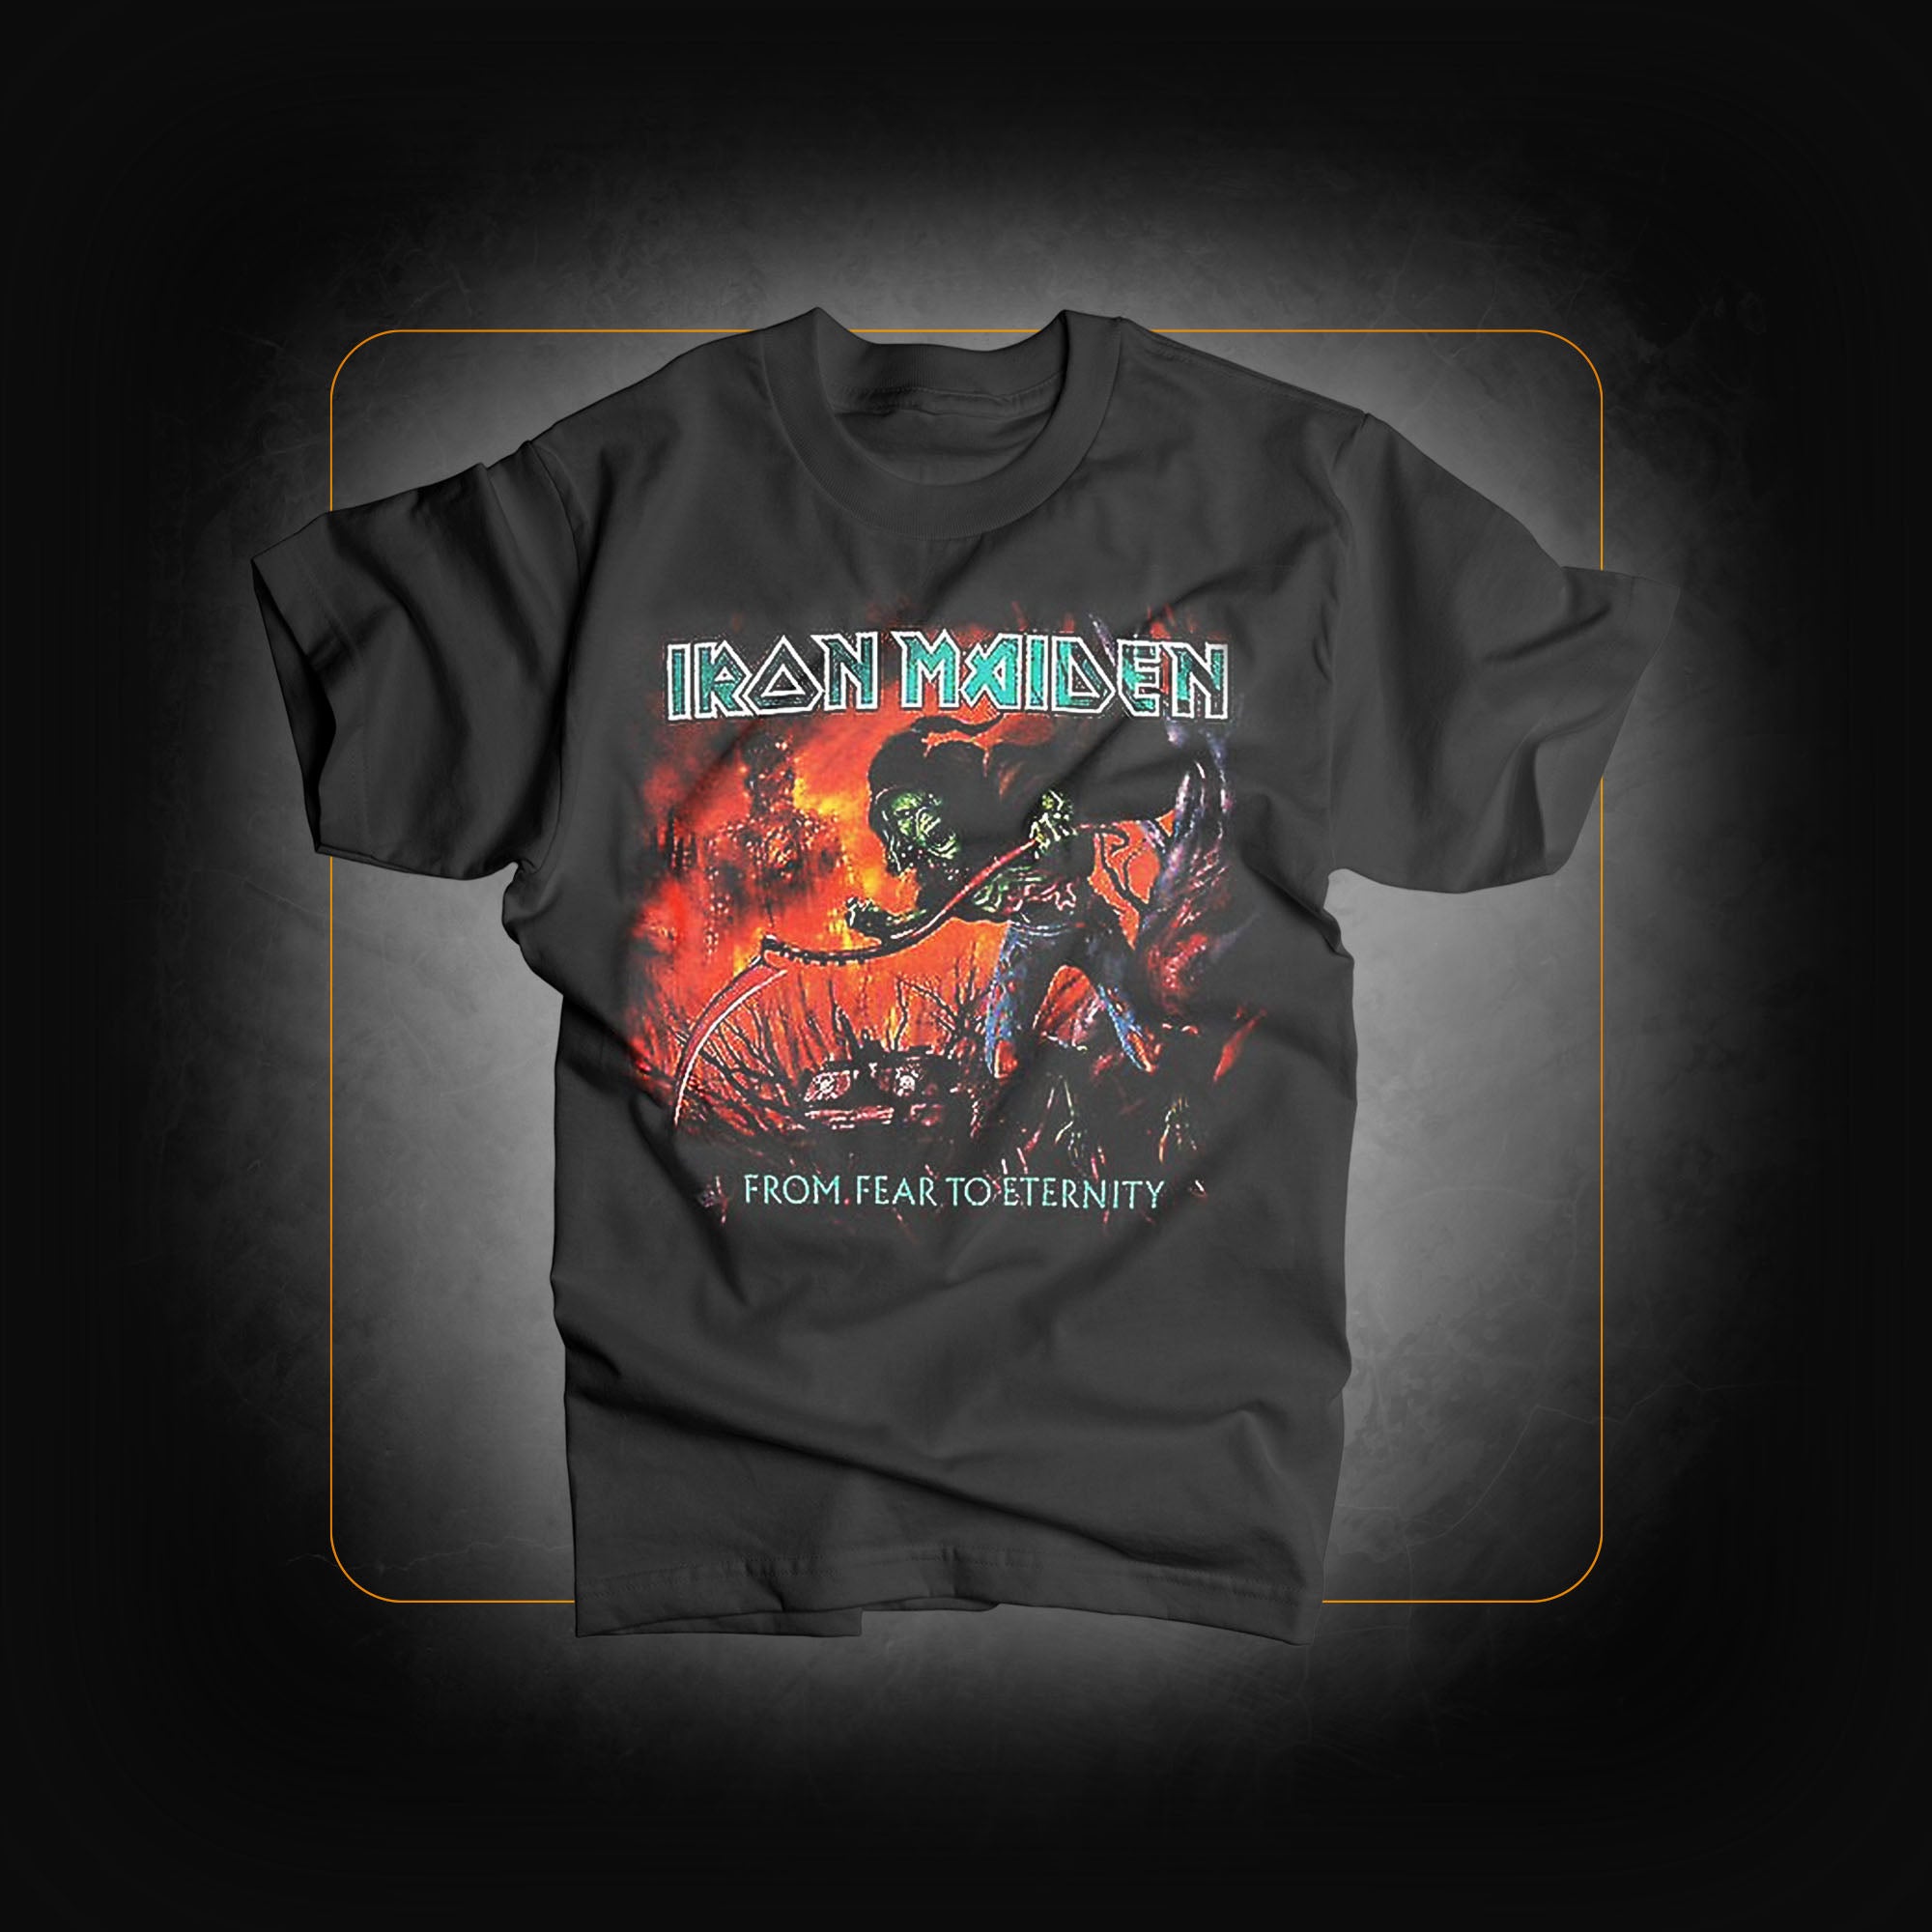 From fear to eternity album t-shirt - Iron Maiden